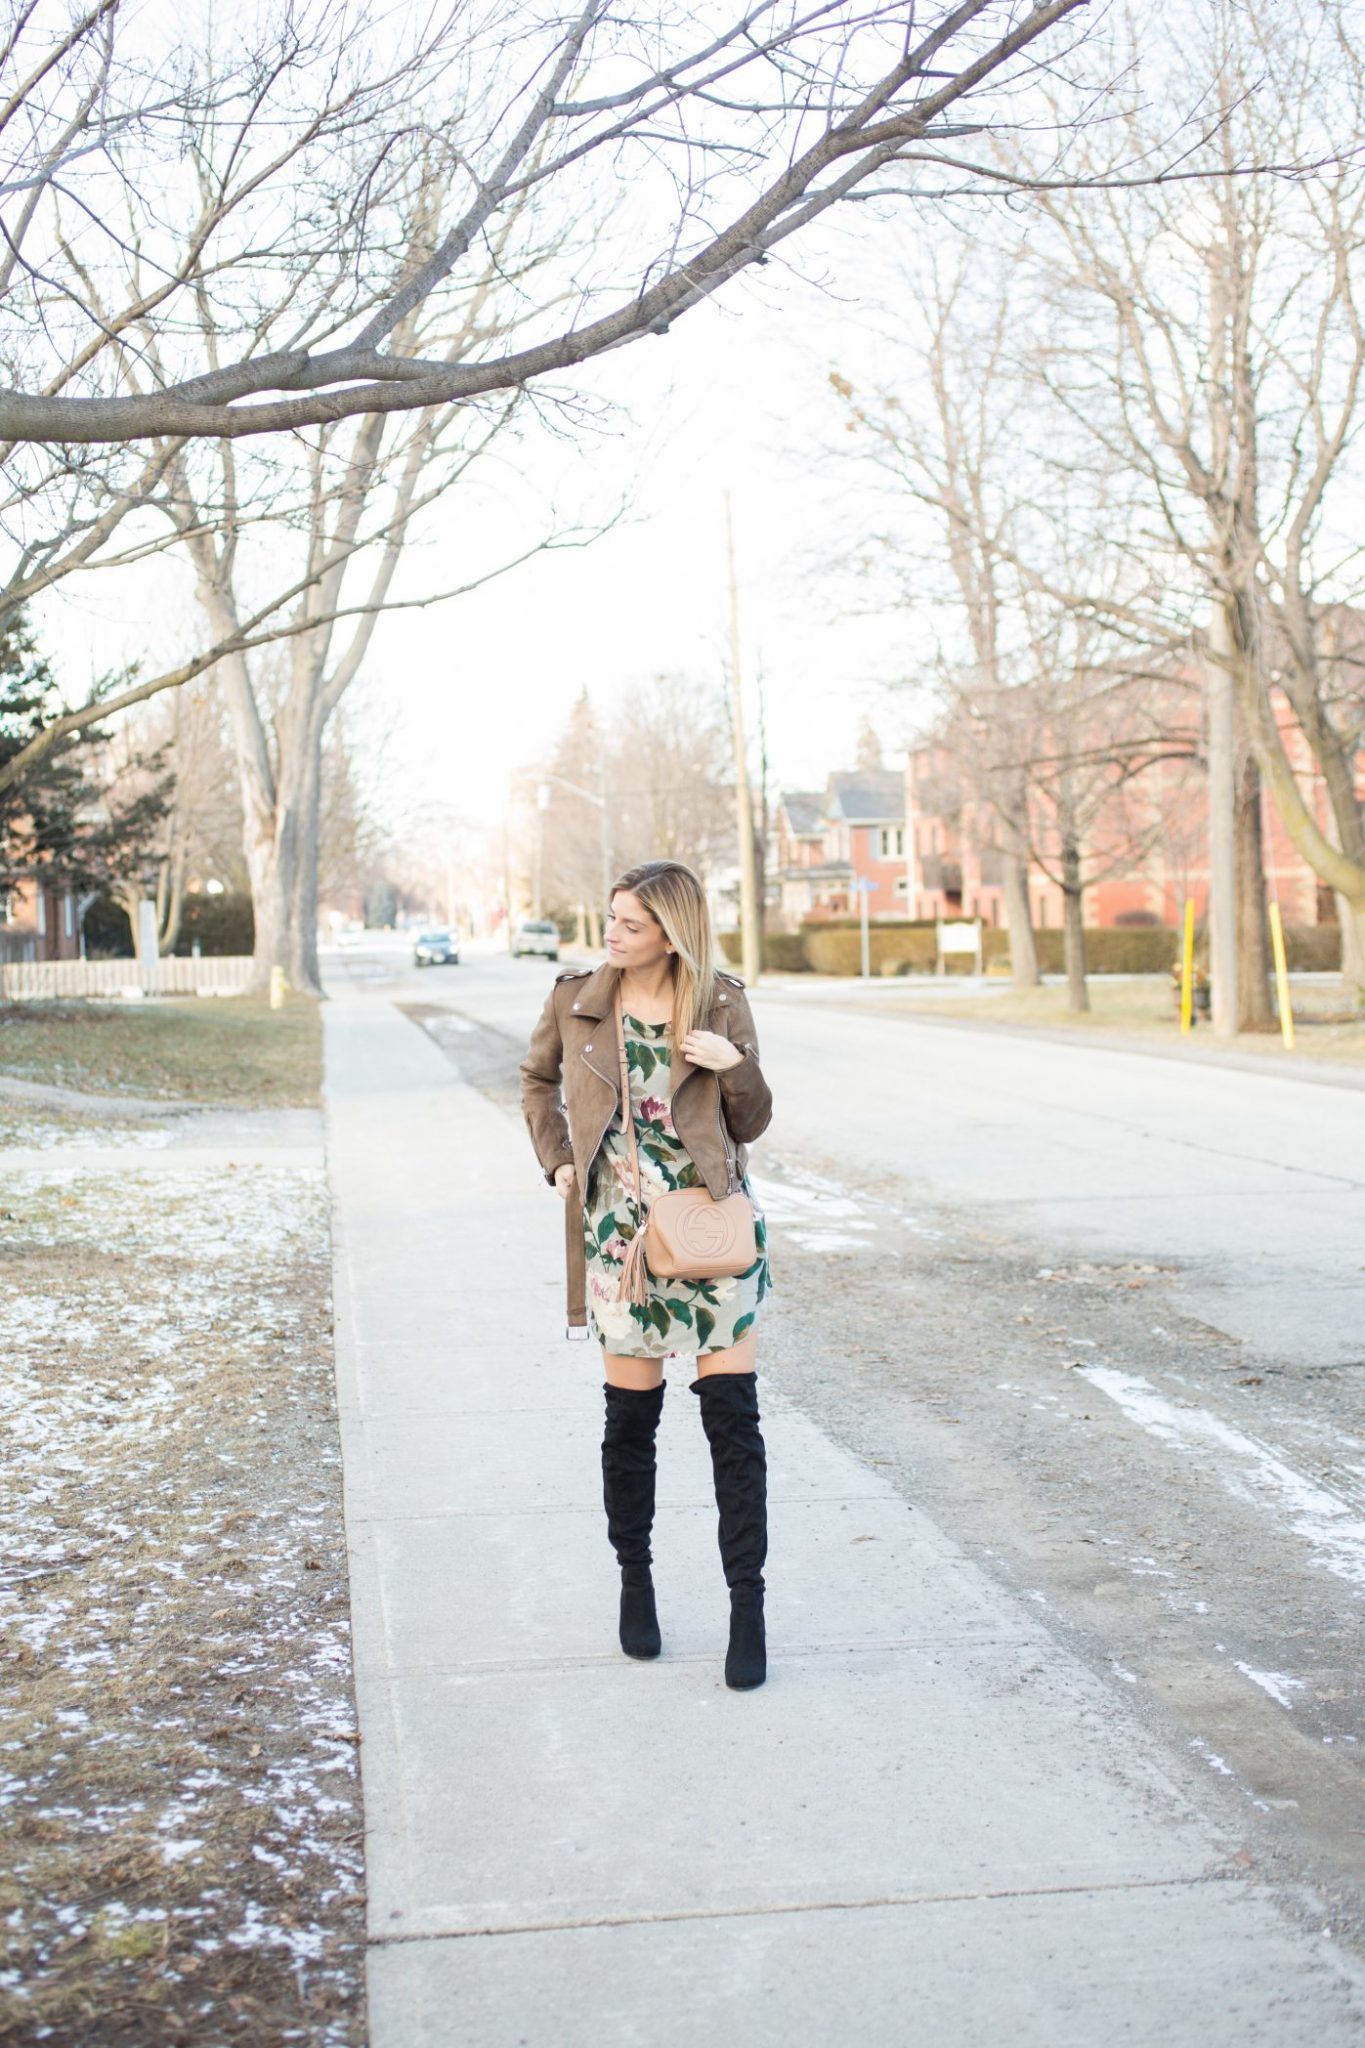 Floral Tunic Dress, black over the knee boots, brown suede moto jacket, beige Gucci Soho Disco bag